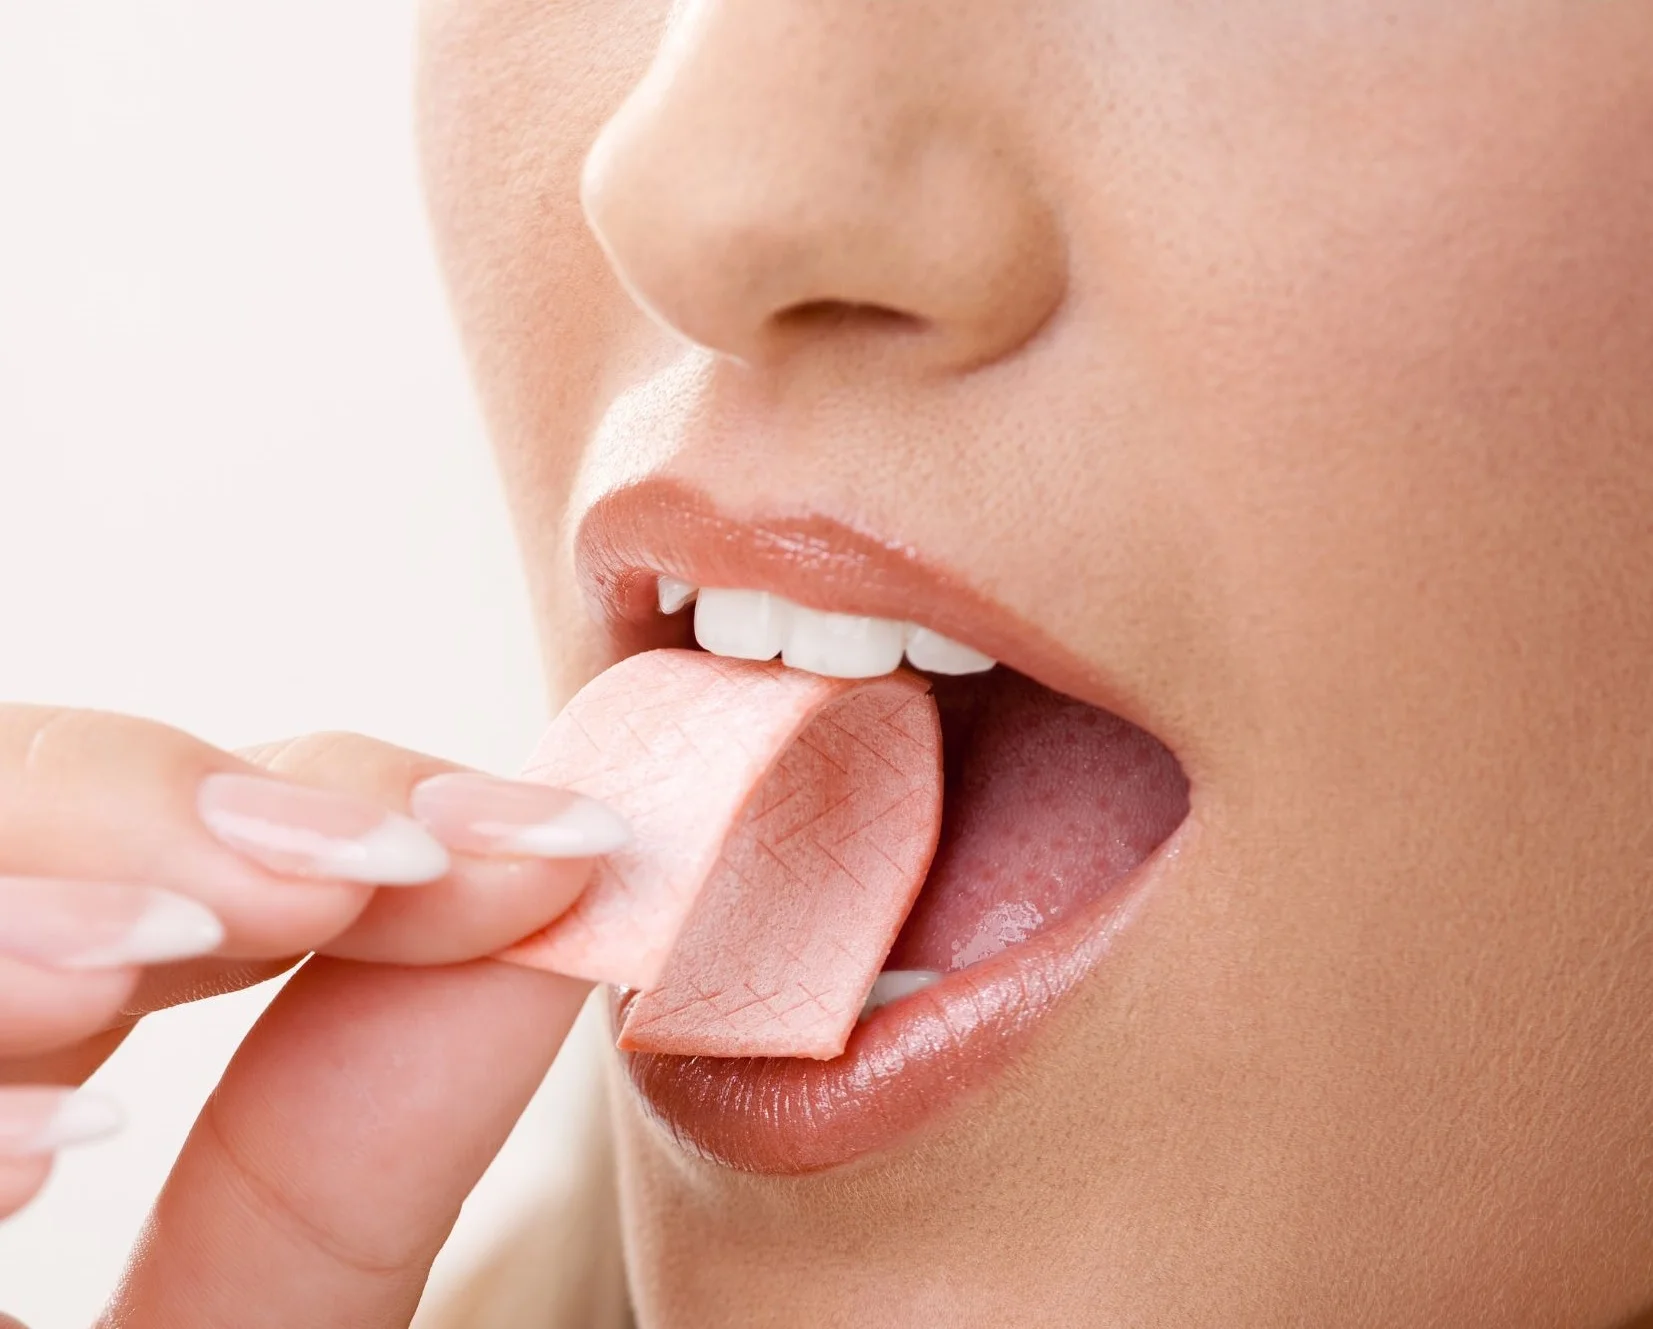 is chewing gum bad for your teeth